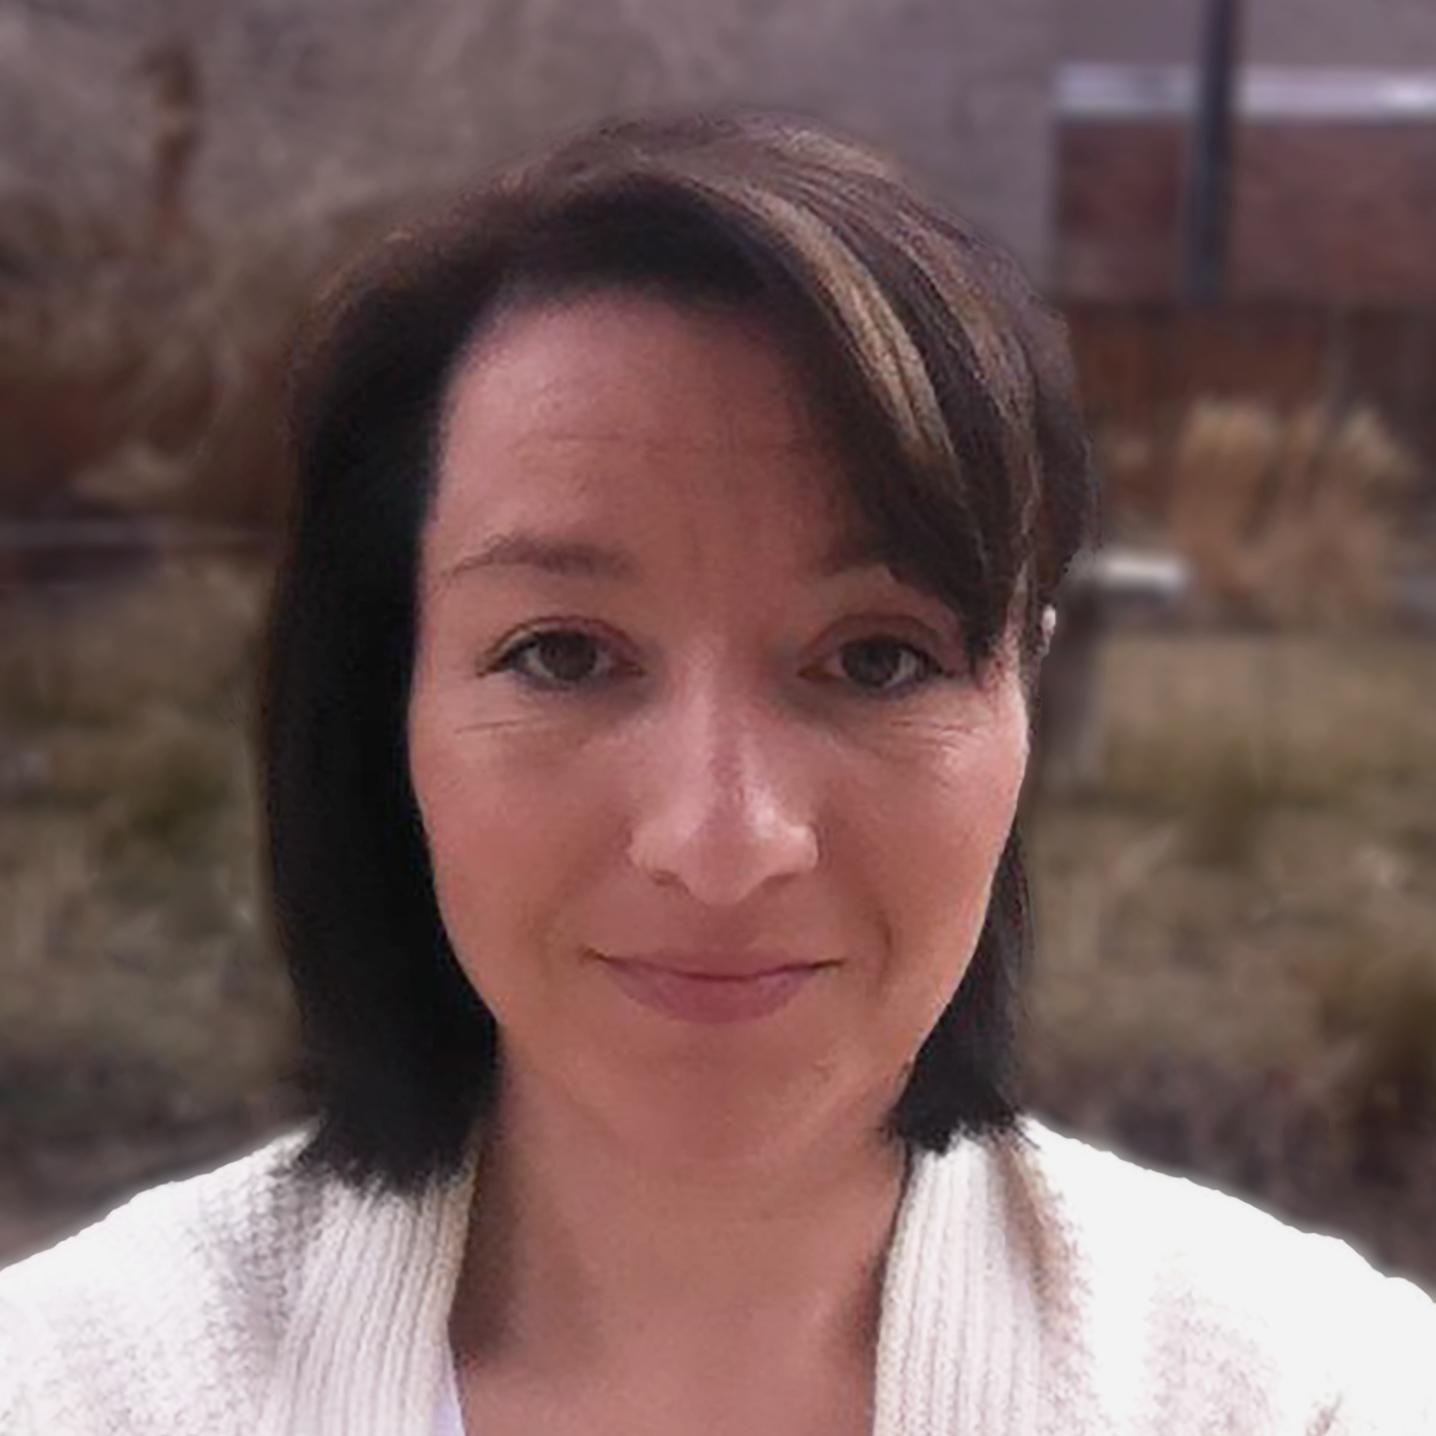 Woman with dark brown hair smiling with her mouth closed, wearing a cream cardigan and white vneck t-shirt.